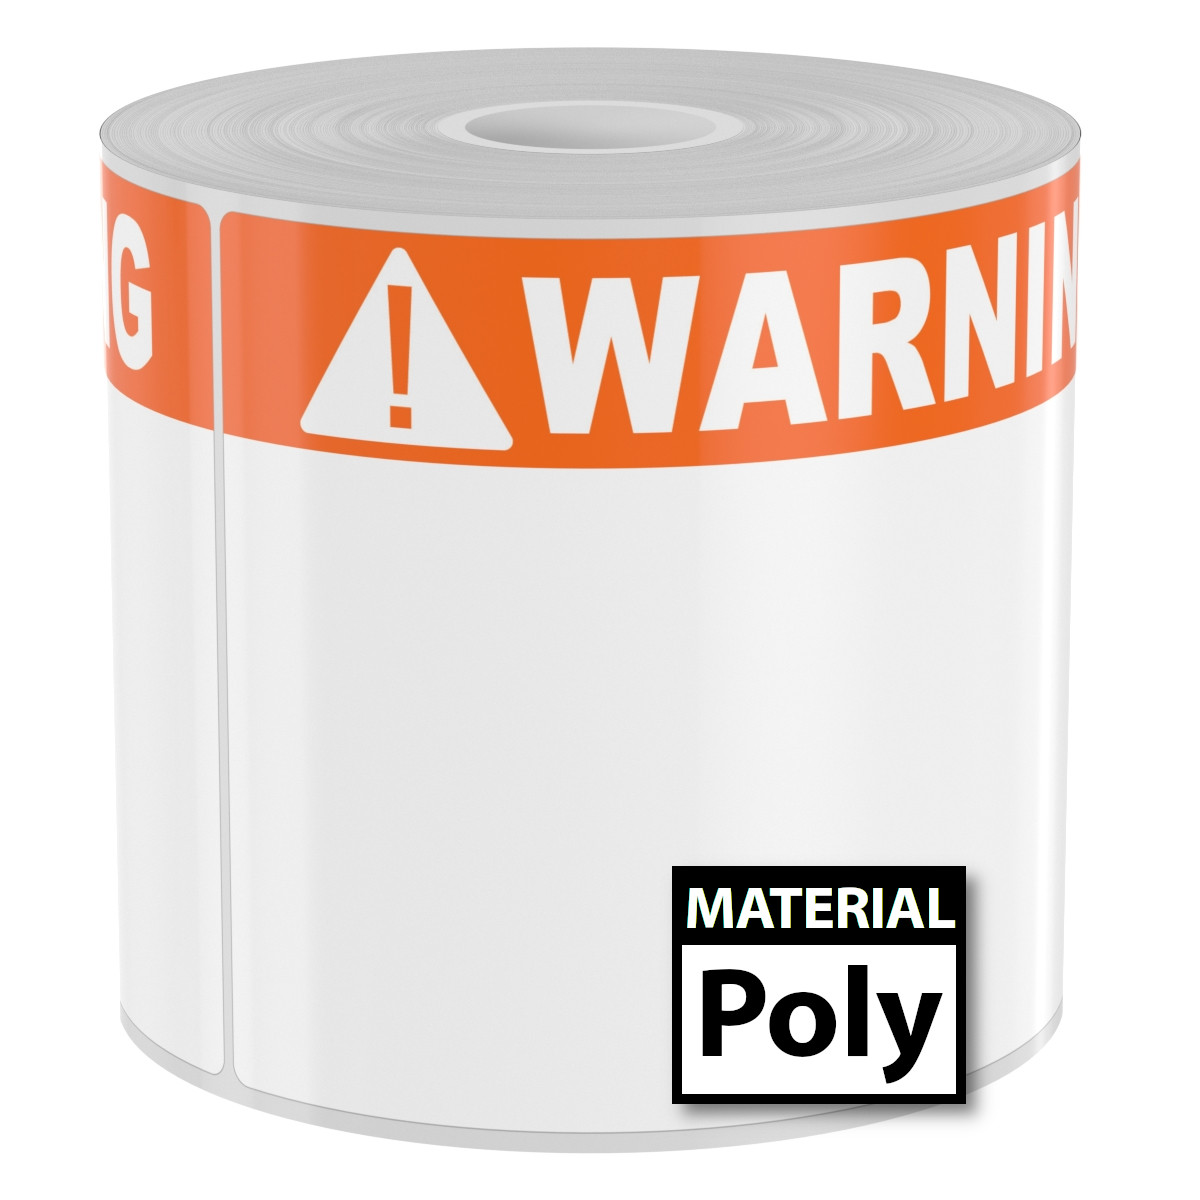 Ask a question about 250 4" x 6" High-Performance Poly Arc Flash Labels White Warning on Orange Header